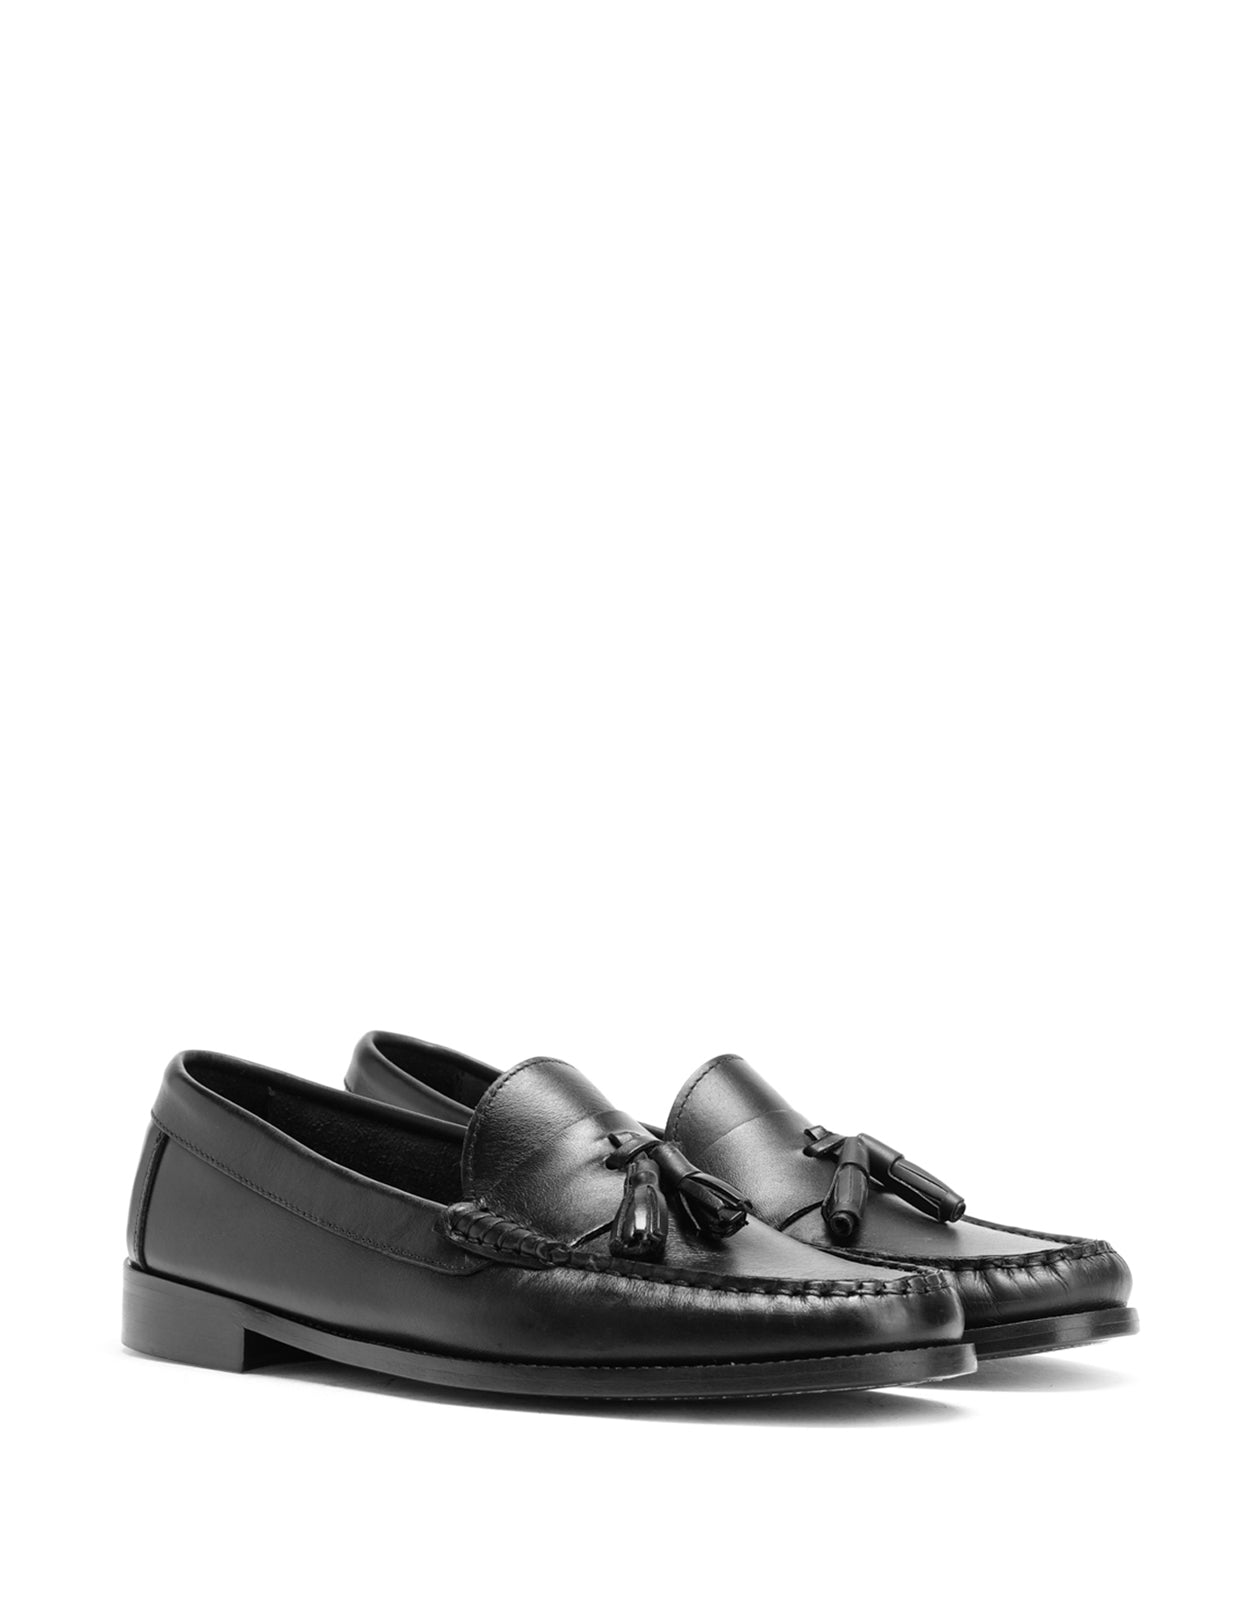 RRP €150 8 Leather Loafer Shoes Size 43 UK 9 US 10 Black Tassels Made in Italy gallery main photo